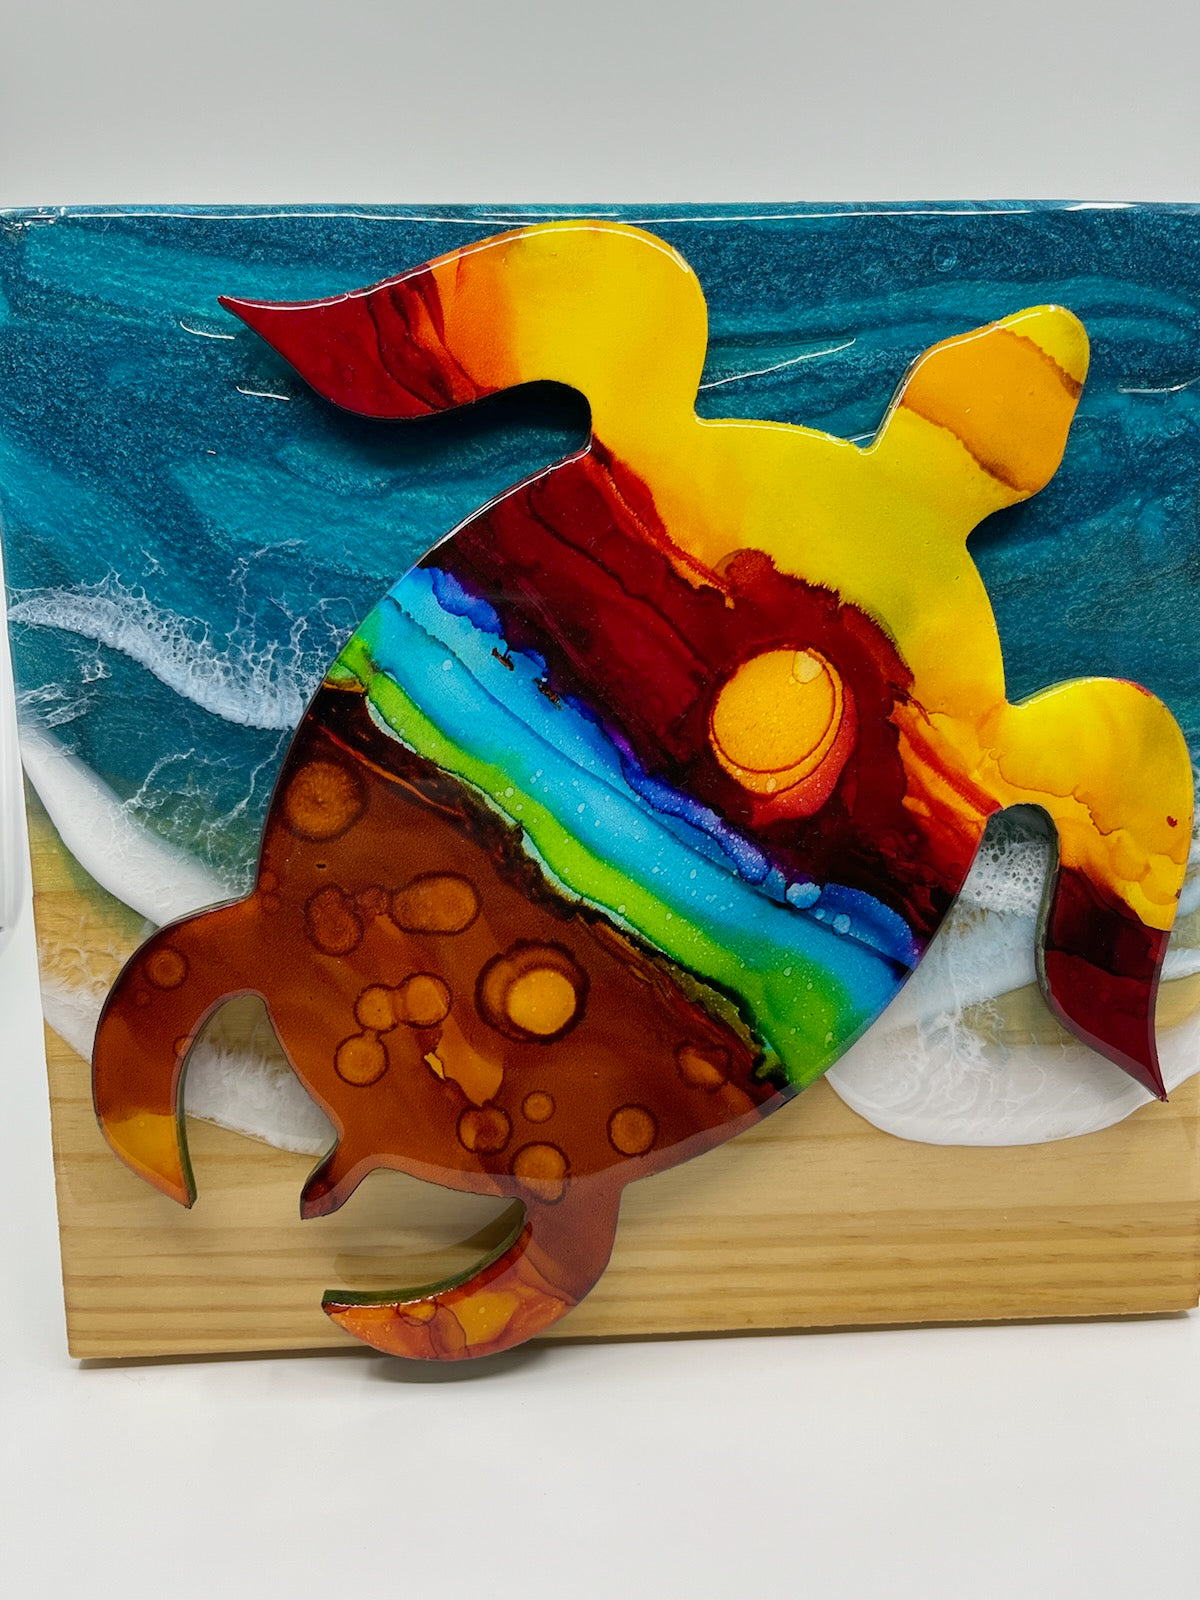 Hand Painted Turtle Art Work By Barbara Newsome. Alcohol Inks on PVC cut out mounted to a wood board with Ocean Resin Waves